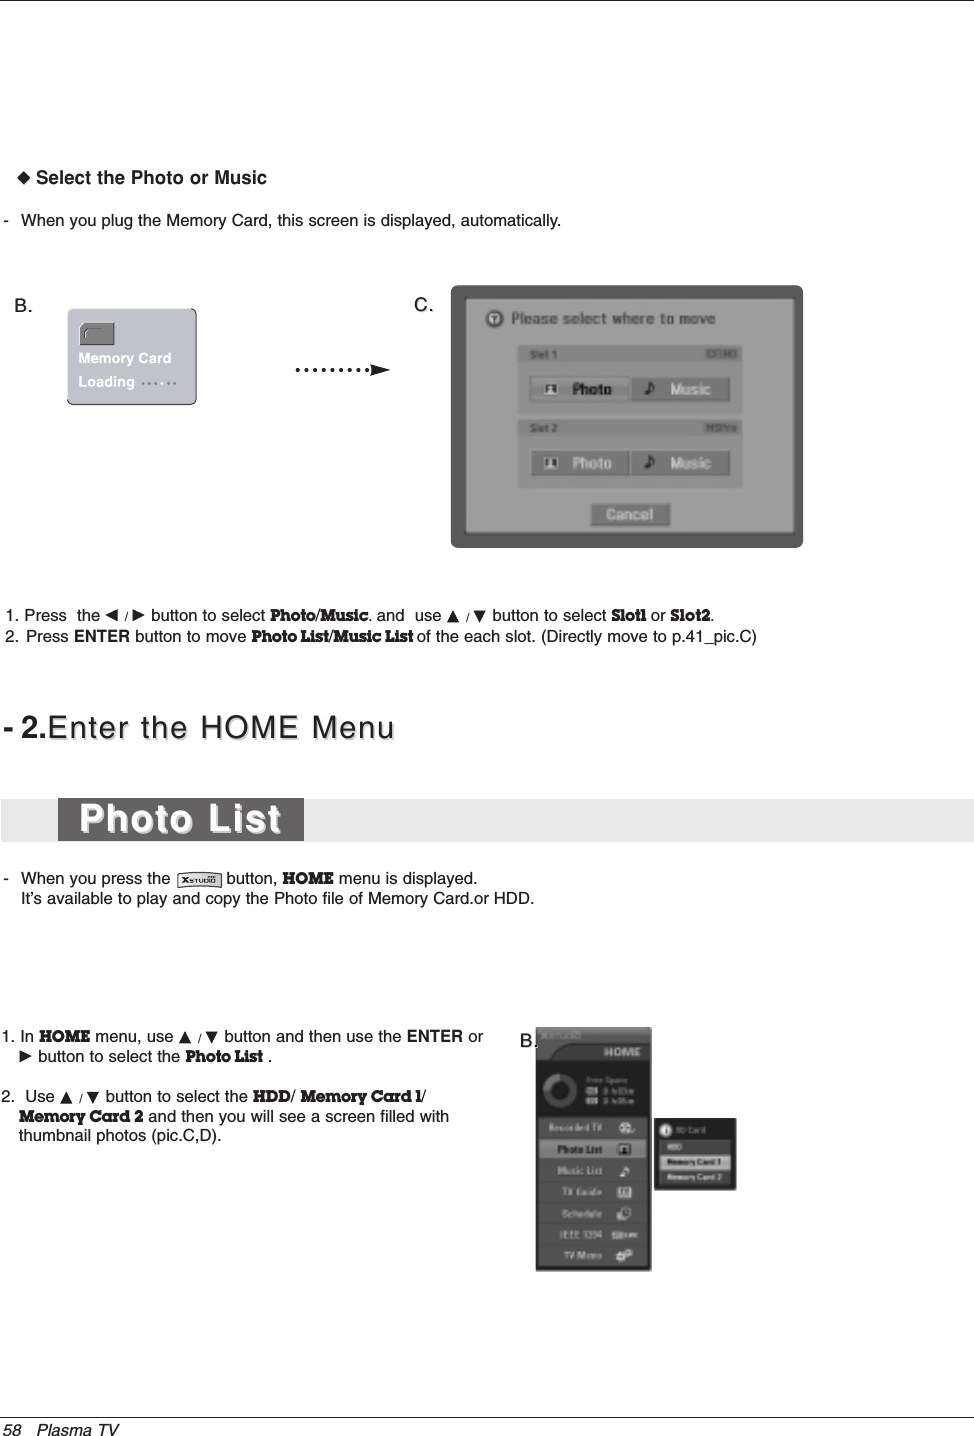 58 Plasma TV1. In HOME menu, use D / Ebutton and then use the ENTER orG button to select the Photo List .2.  Use D / Ebutton to select the HDD/ Memory Card 1/Memory Card 2 and then you will see a screen filled withthumbnail photos (pic.C,D). B.B.-2.Enter the HOME MenuEnter the HOME Menu- When you press the           button, HOME menu is displayed.It’s available to play and copy the Photo file of Memory Card.or HDD.- When you plug the Memory Card, this screen is displayed, automatically. B.B. C.C.WWSelect the Photo or Music1. Press  the F / G button to select Photo/Music. and  use D / Ebutton to select Slot1 or Slot2.2. Press ENTER button to move Photo List/Music List of the each slot. (Directly move to p.41_pic.C)Photo ListPhoto List